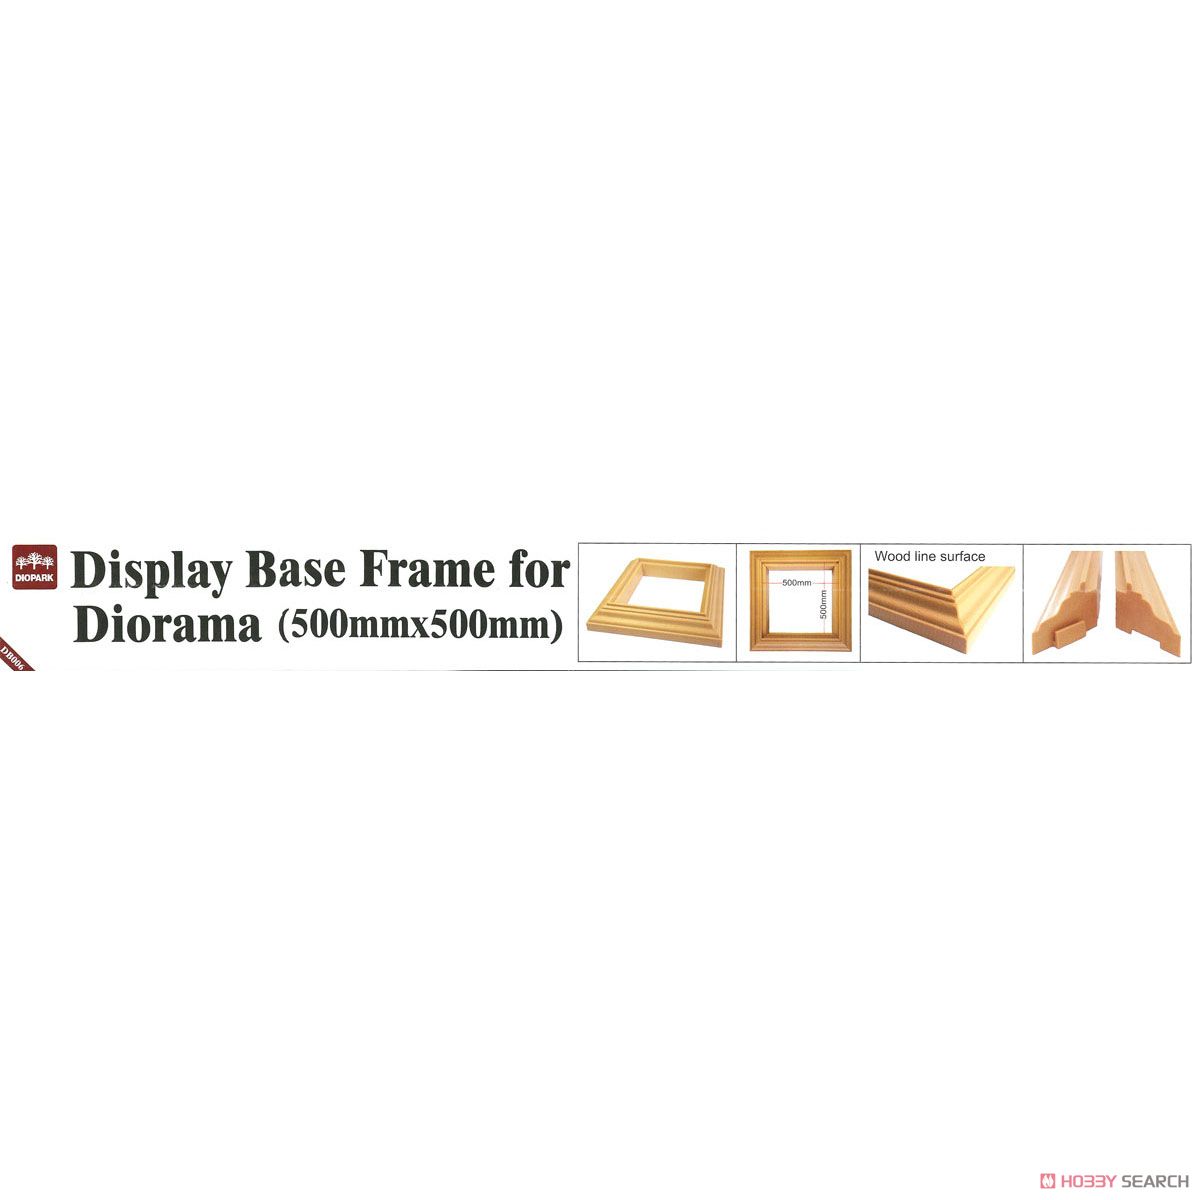 Display Base Frame for Diorama 50cm x 2 pieces set (Base 541mm, Height 25mm) (Plastic model) Package1